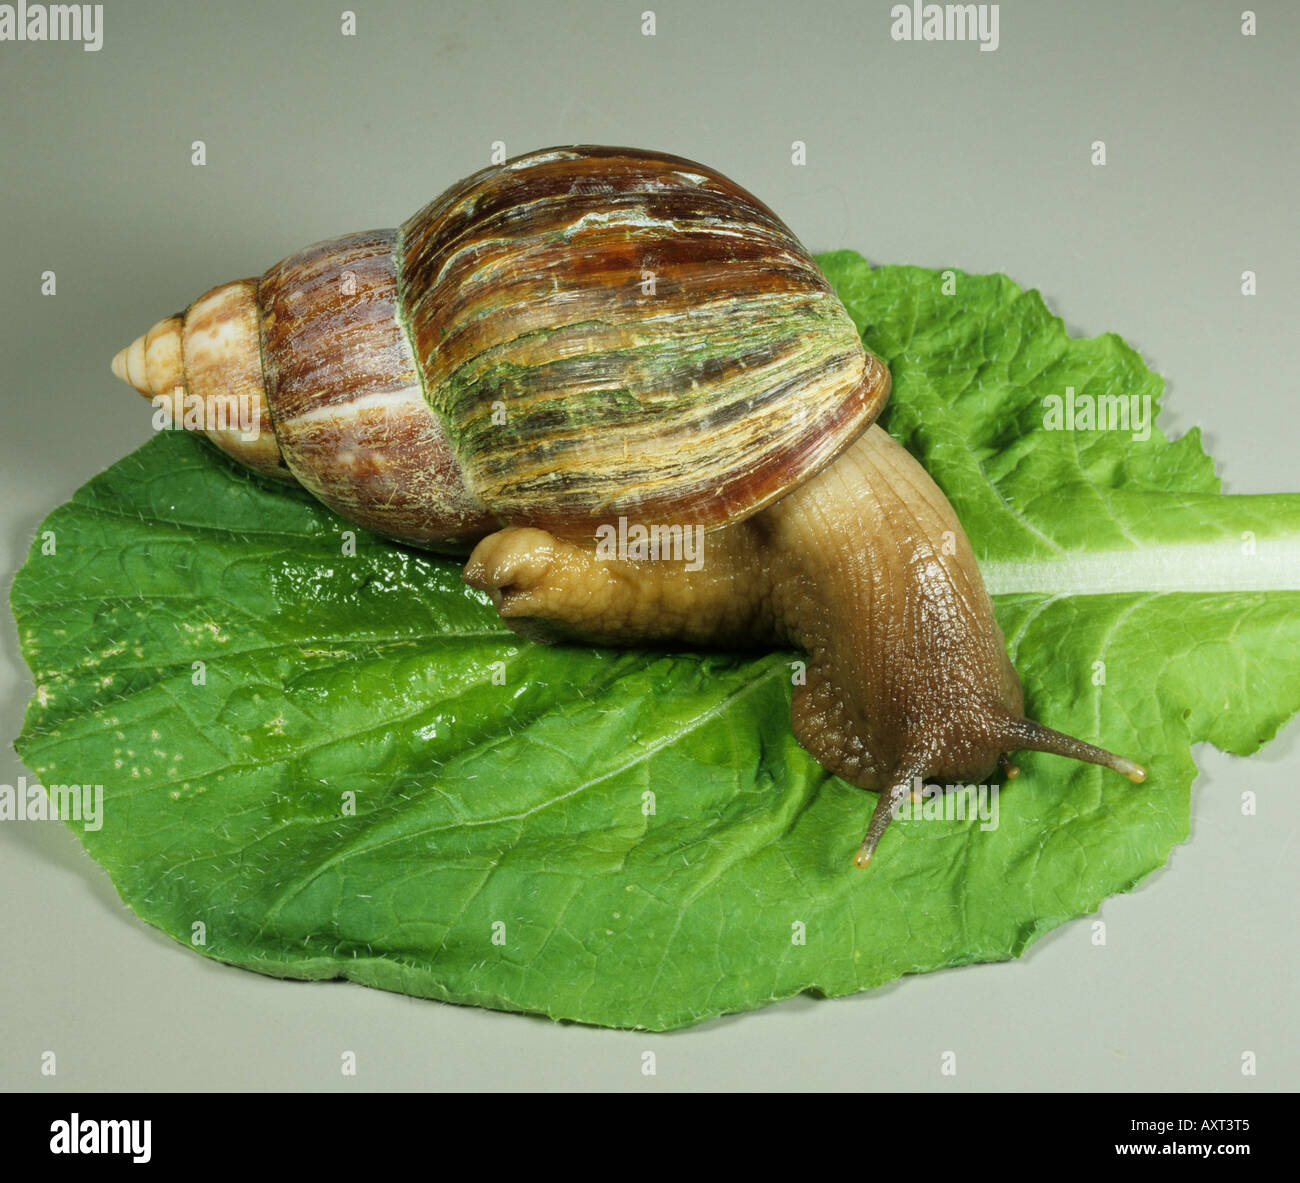 African giant snail (Lissachatina fulica) adult on a leaf Stock Photo